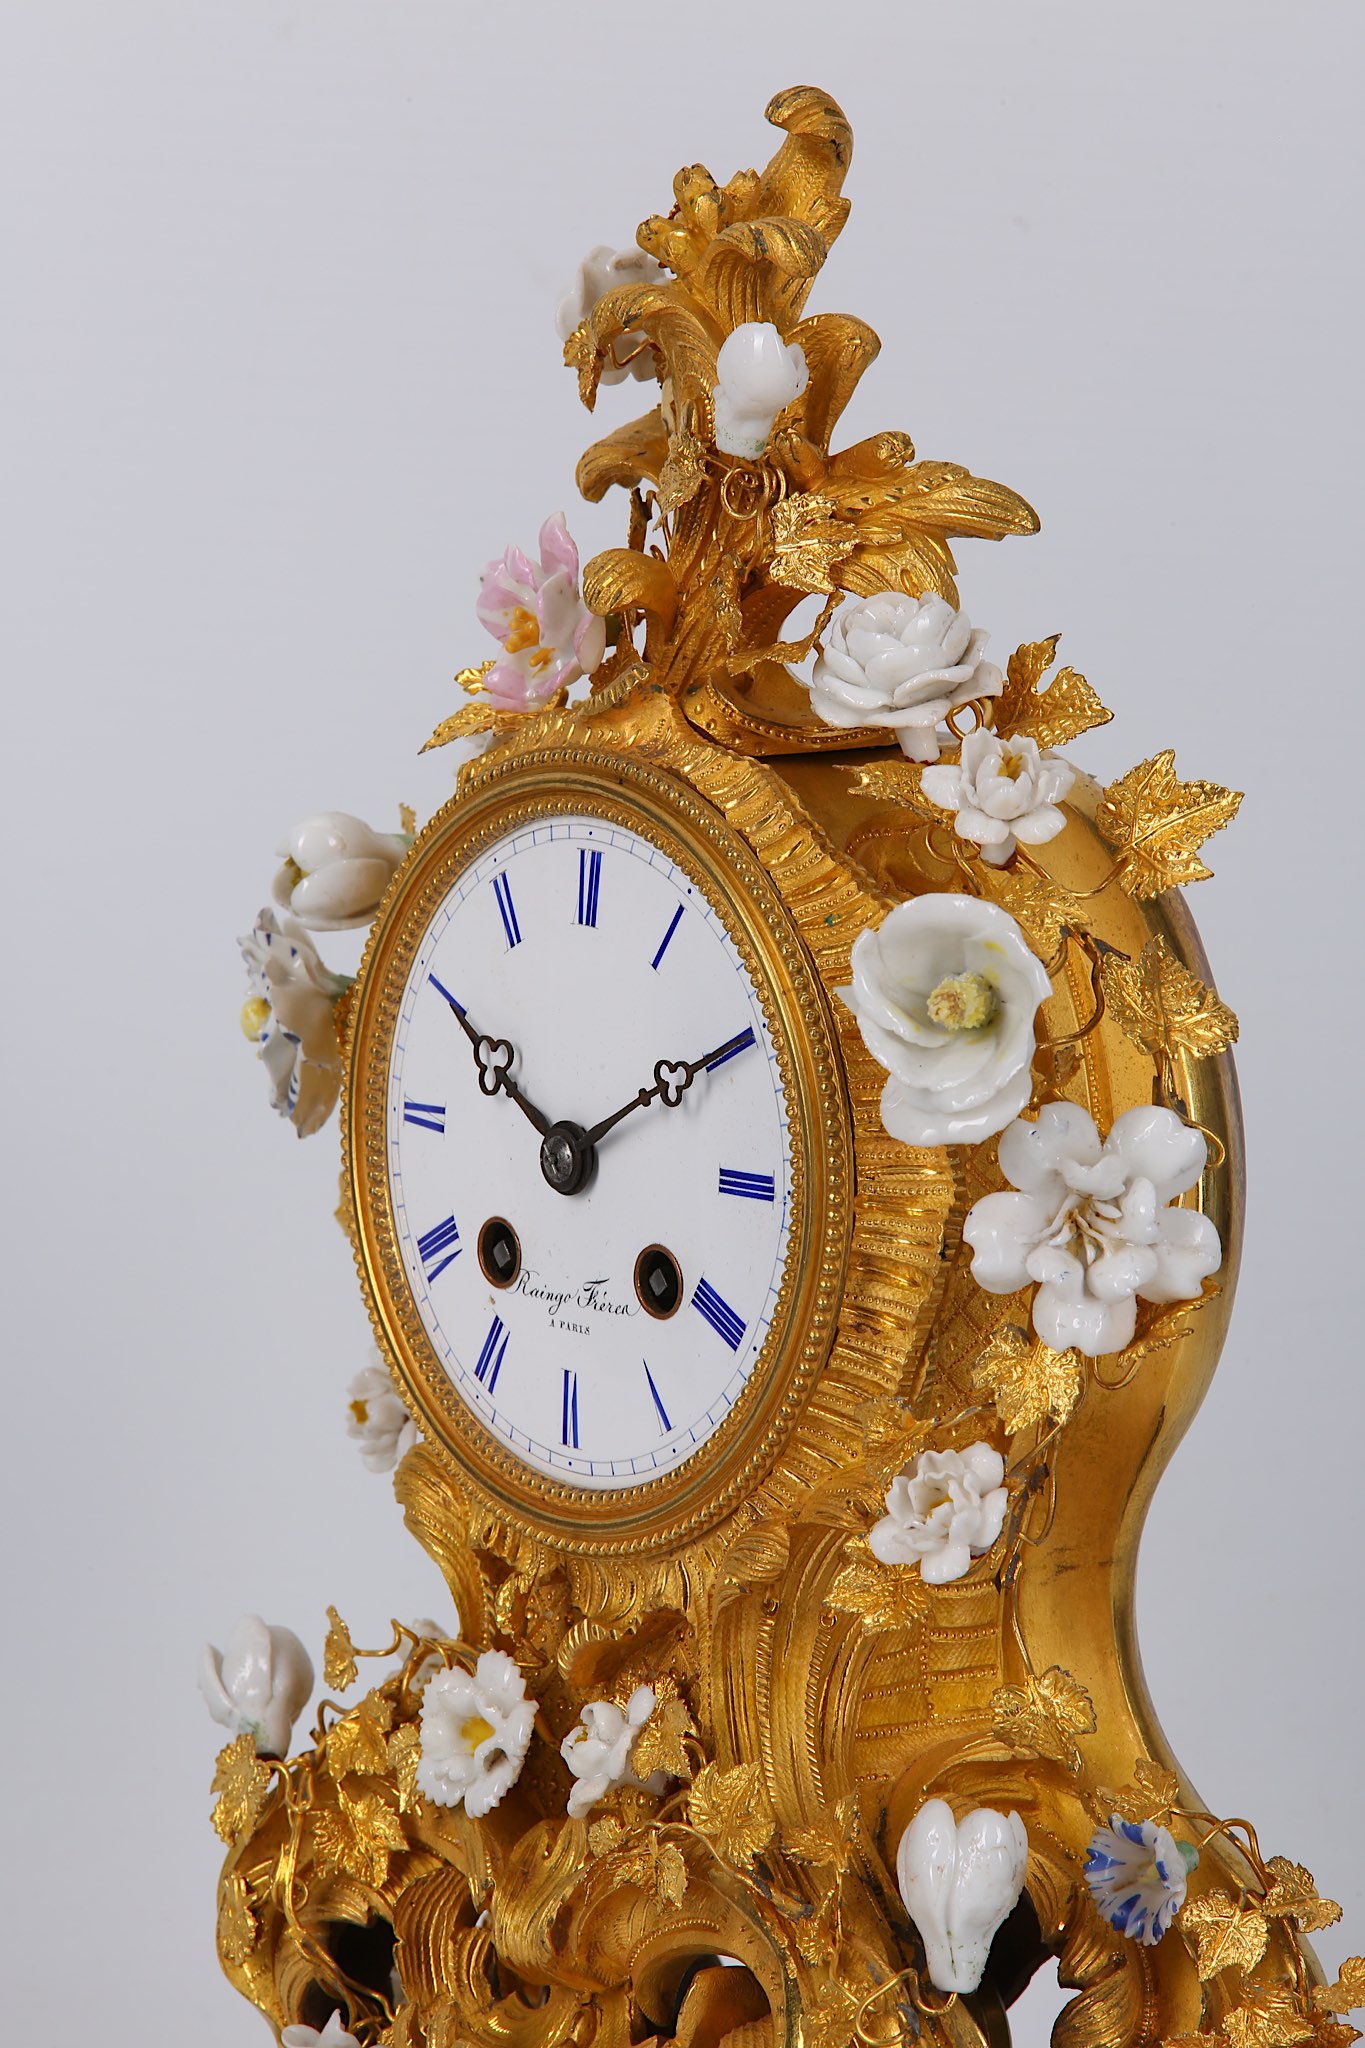 A MID 19TH CENTURY FRENCH GILT BRONZE AND PORCELAIN MOUNTED MANTEL CLOCK BY RAINGO FRERES, PARIS the - Image 8 of 9